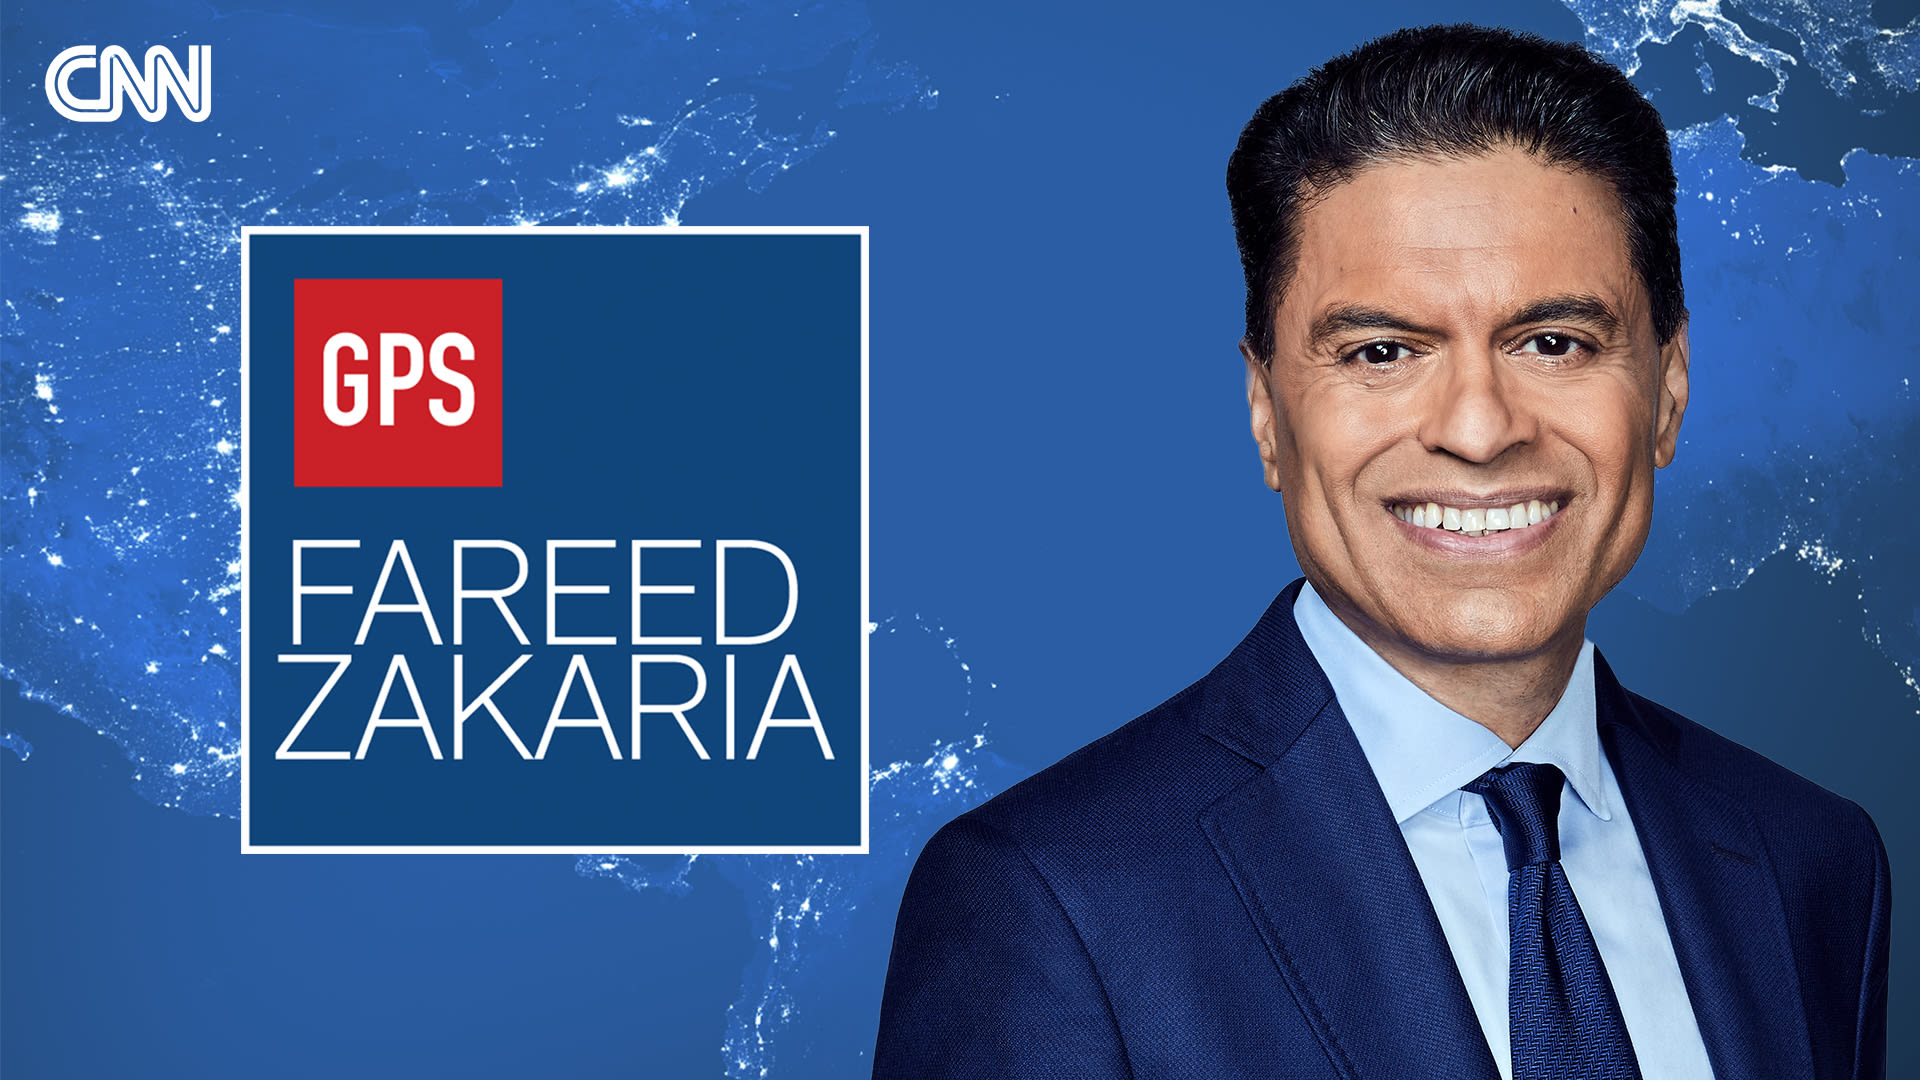 Human rights trailblazer Aryeh Neier on Israel’s genocide accusation, Bill Maher on the left and right in America, Doris Kearns Goodwin revisits the 1960s - Fareed Zakaria GPS - Podcast on CNN Audio...